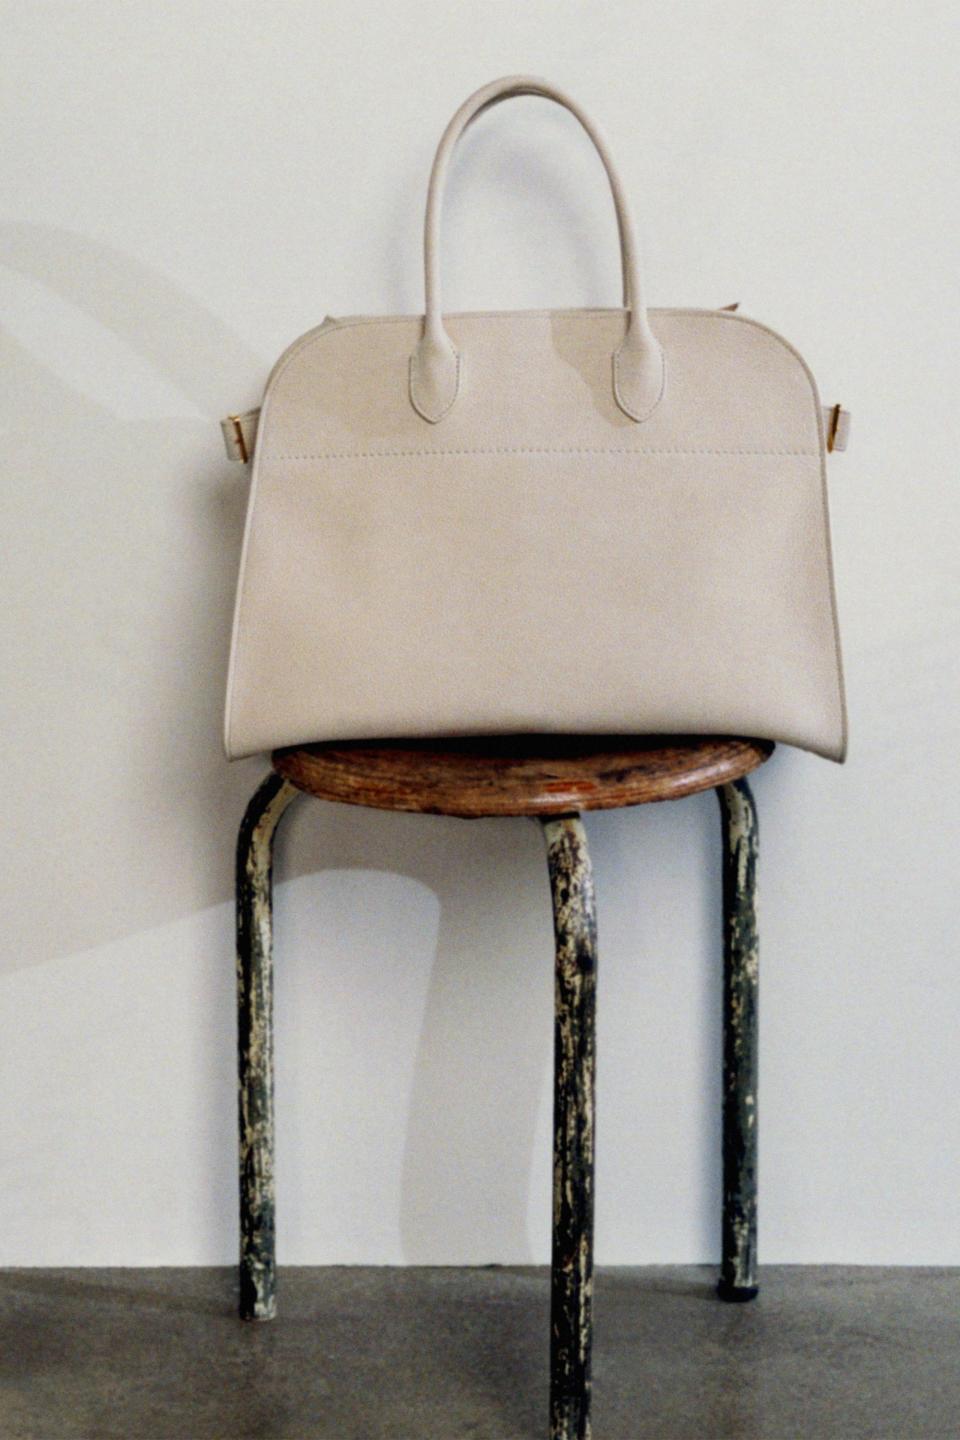 The Margaux bag